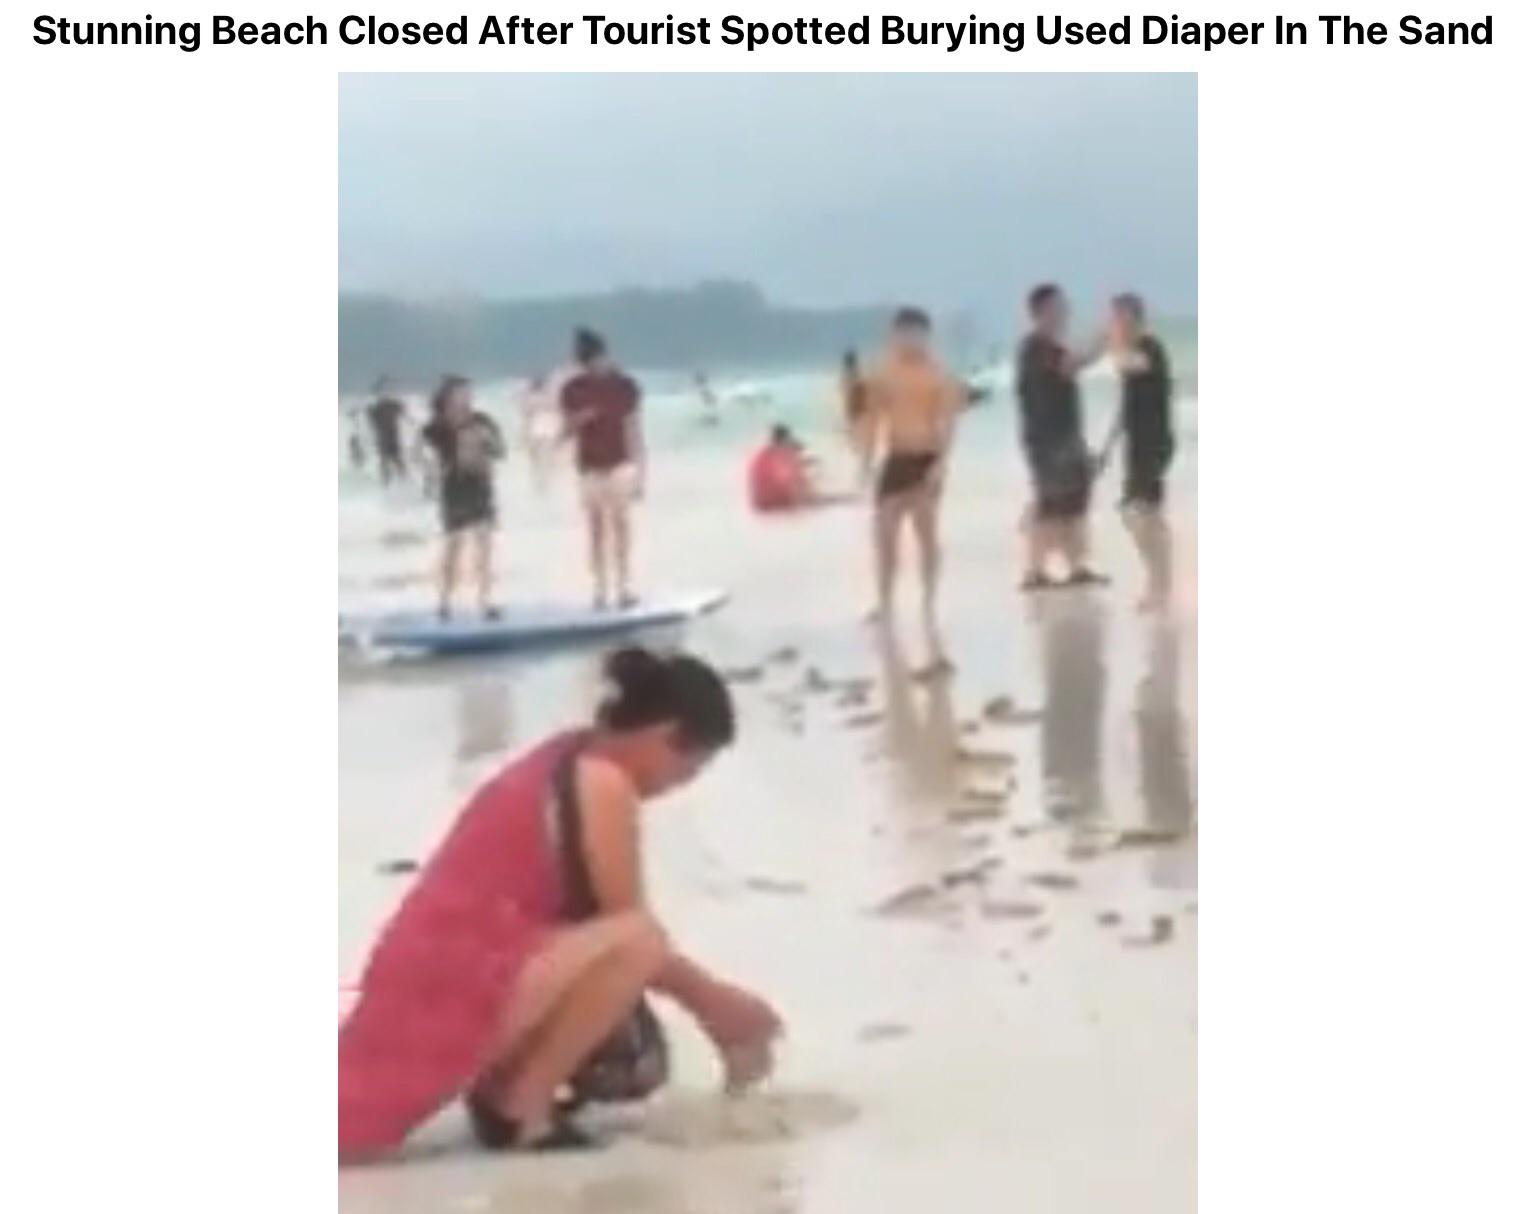 vacation - Stunning Beach Closed After Tourist Spotted Burying Used Diaper In The Sand